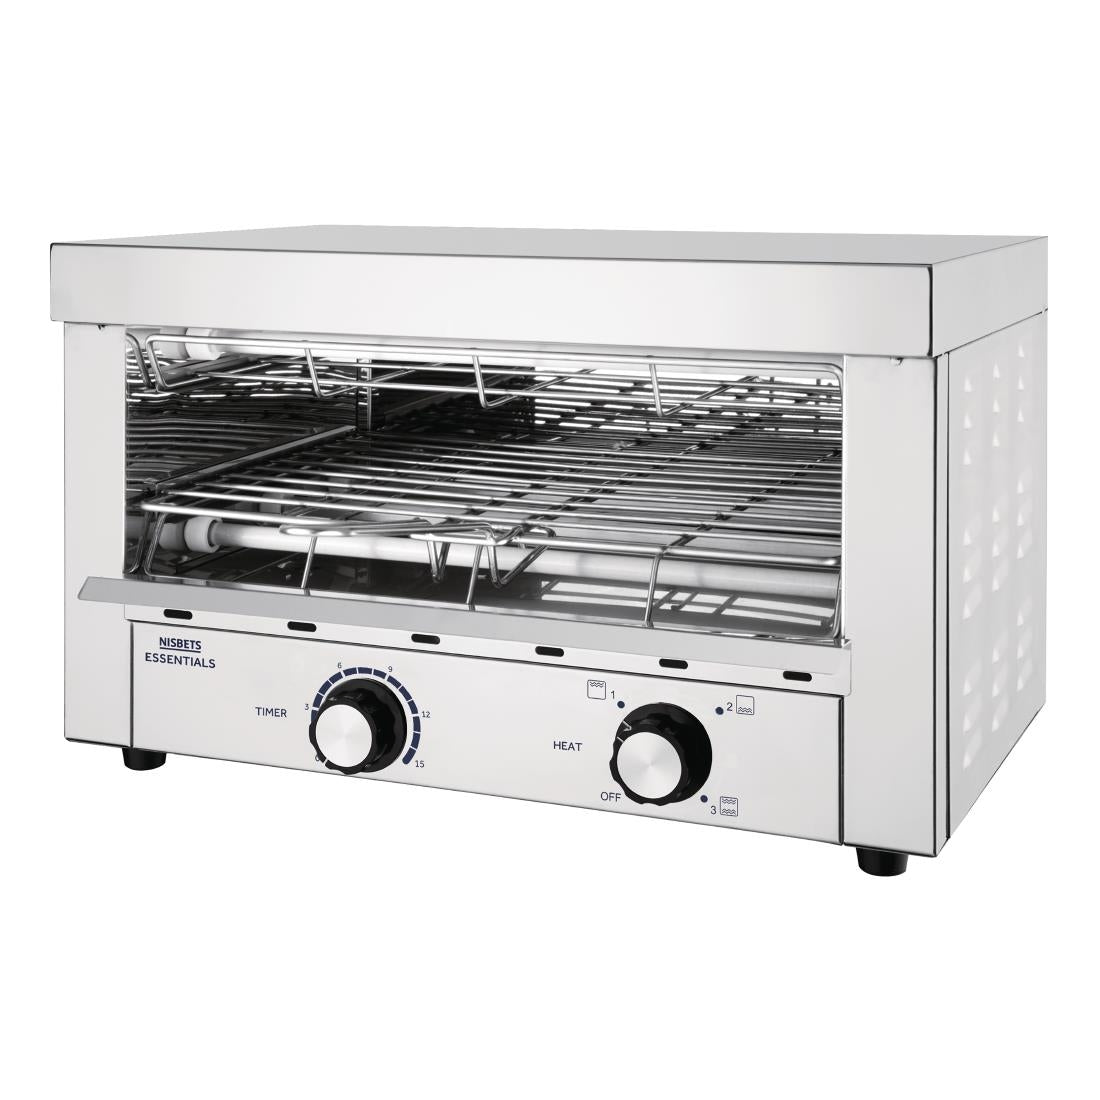 CT917 Nisbets Essentials Toaster Grill JD Catering Equipment Solutions Ltd